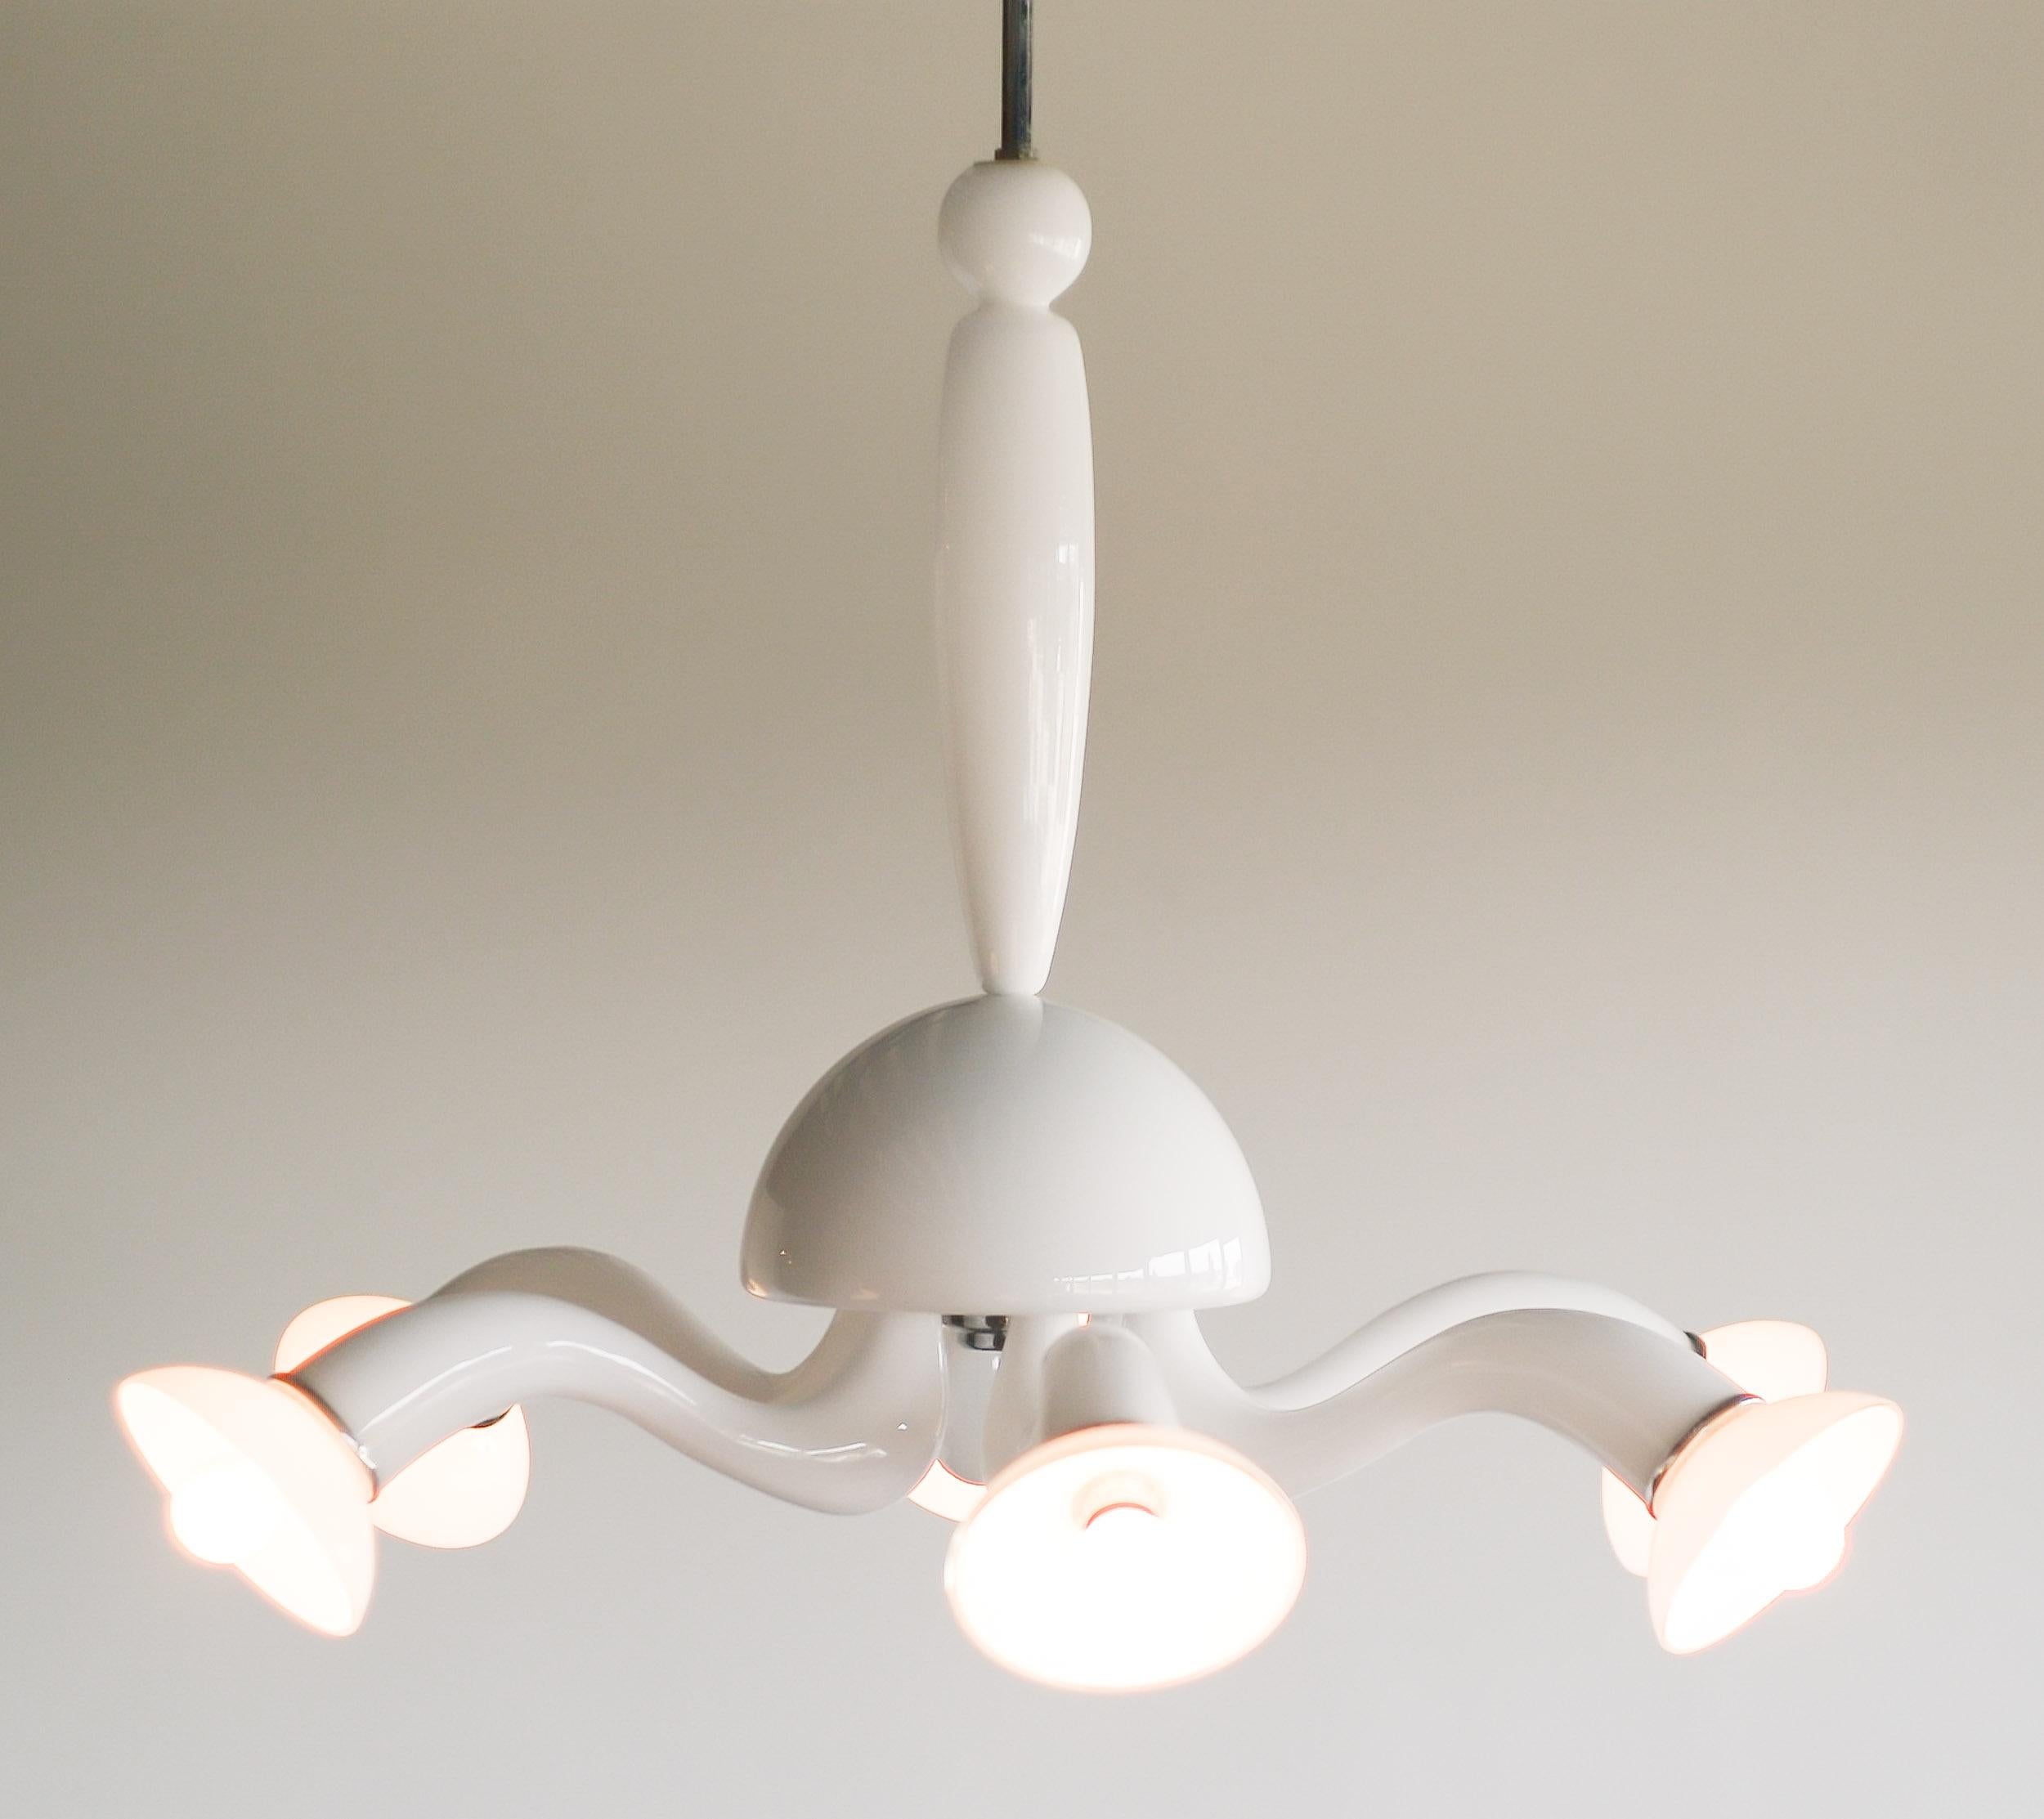 Delicate white Murano glass chandelier with chrome hardware.